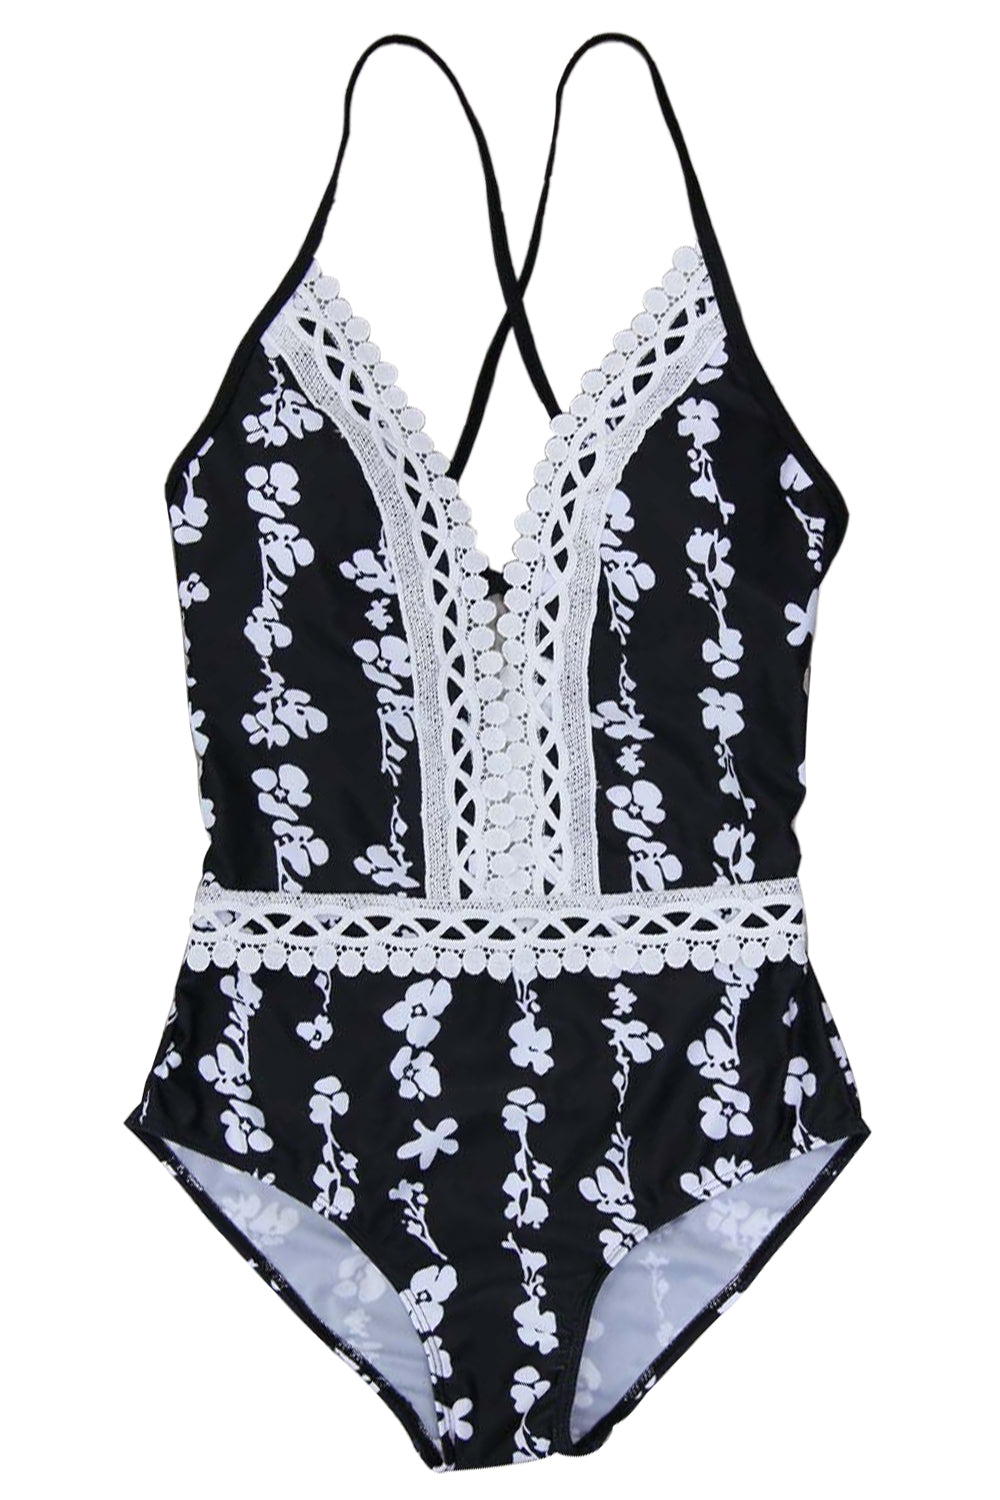 Iyasson Vintage Lace Stripes One-piece Swimsuit